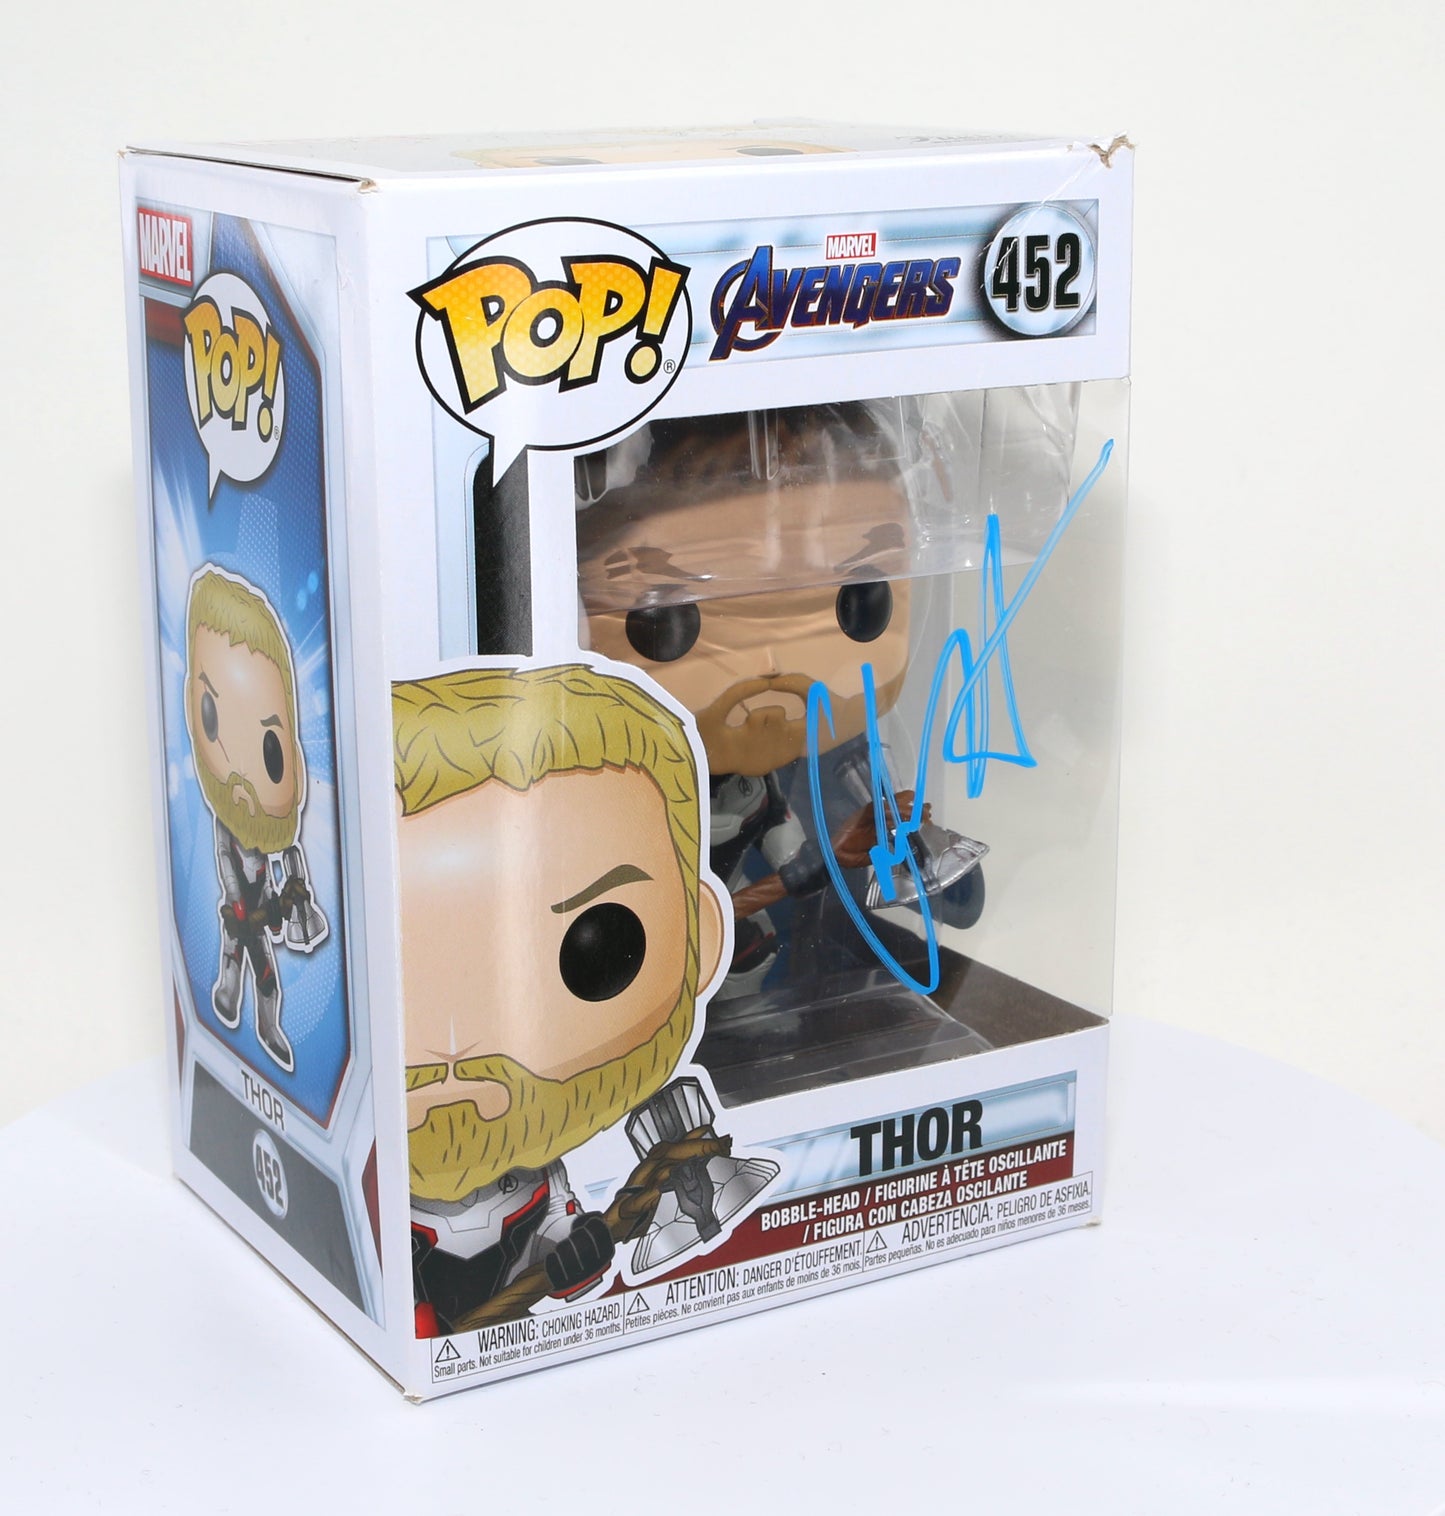 
                  
                    Chris Hemsworth as Thor in Avengers: Endgame (SWAU Authenticated) Signed POP! Funko #452
                  
                